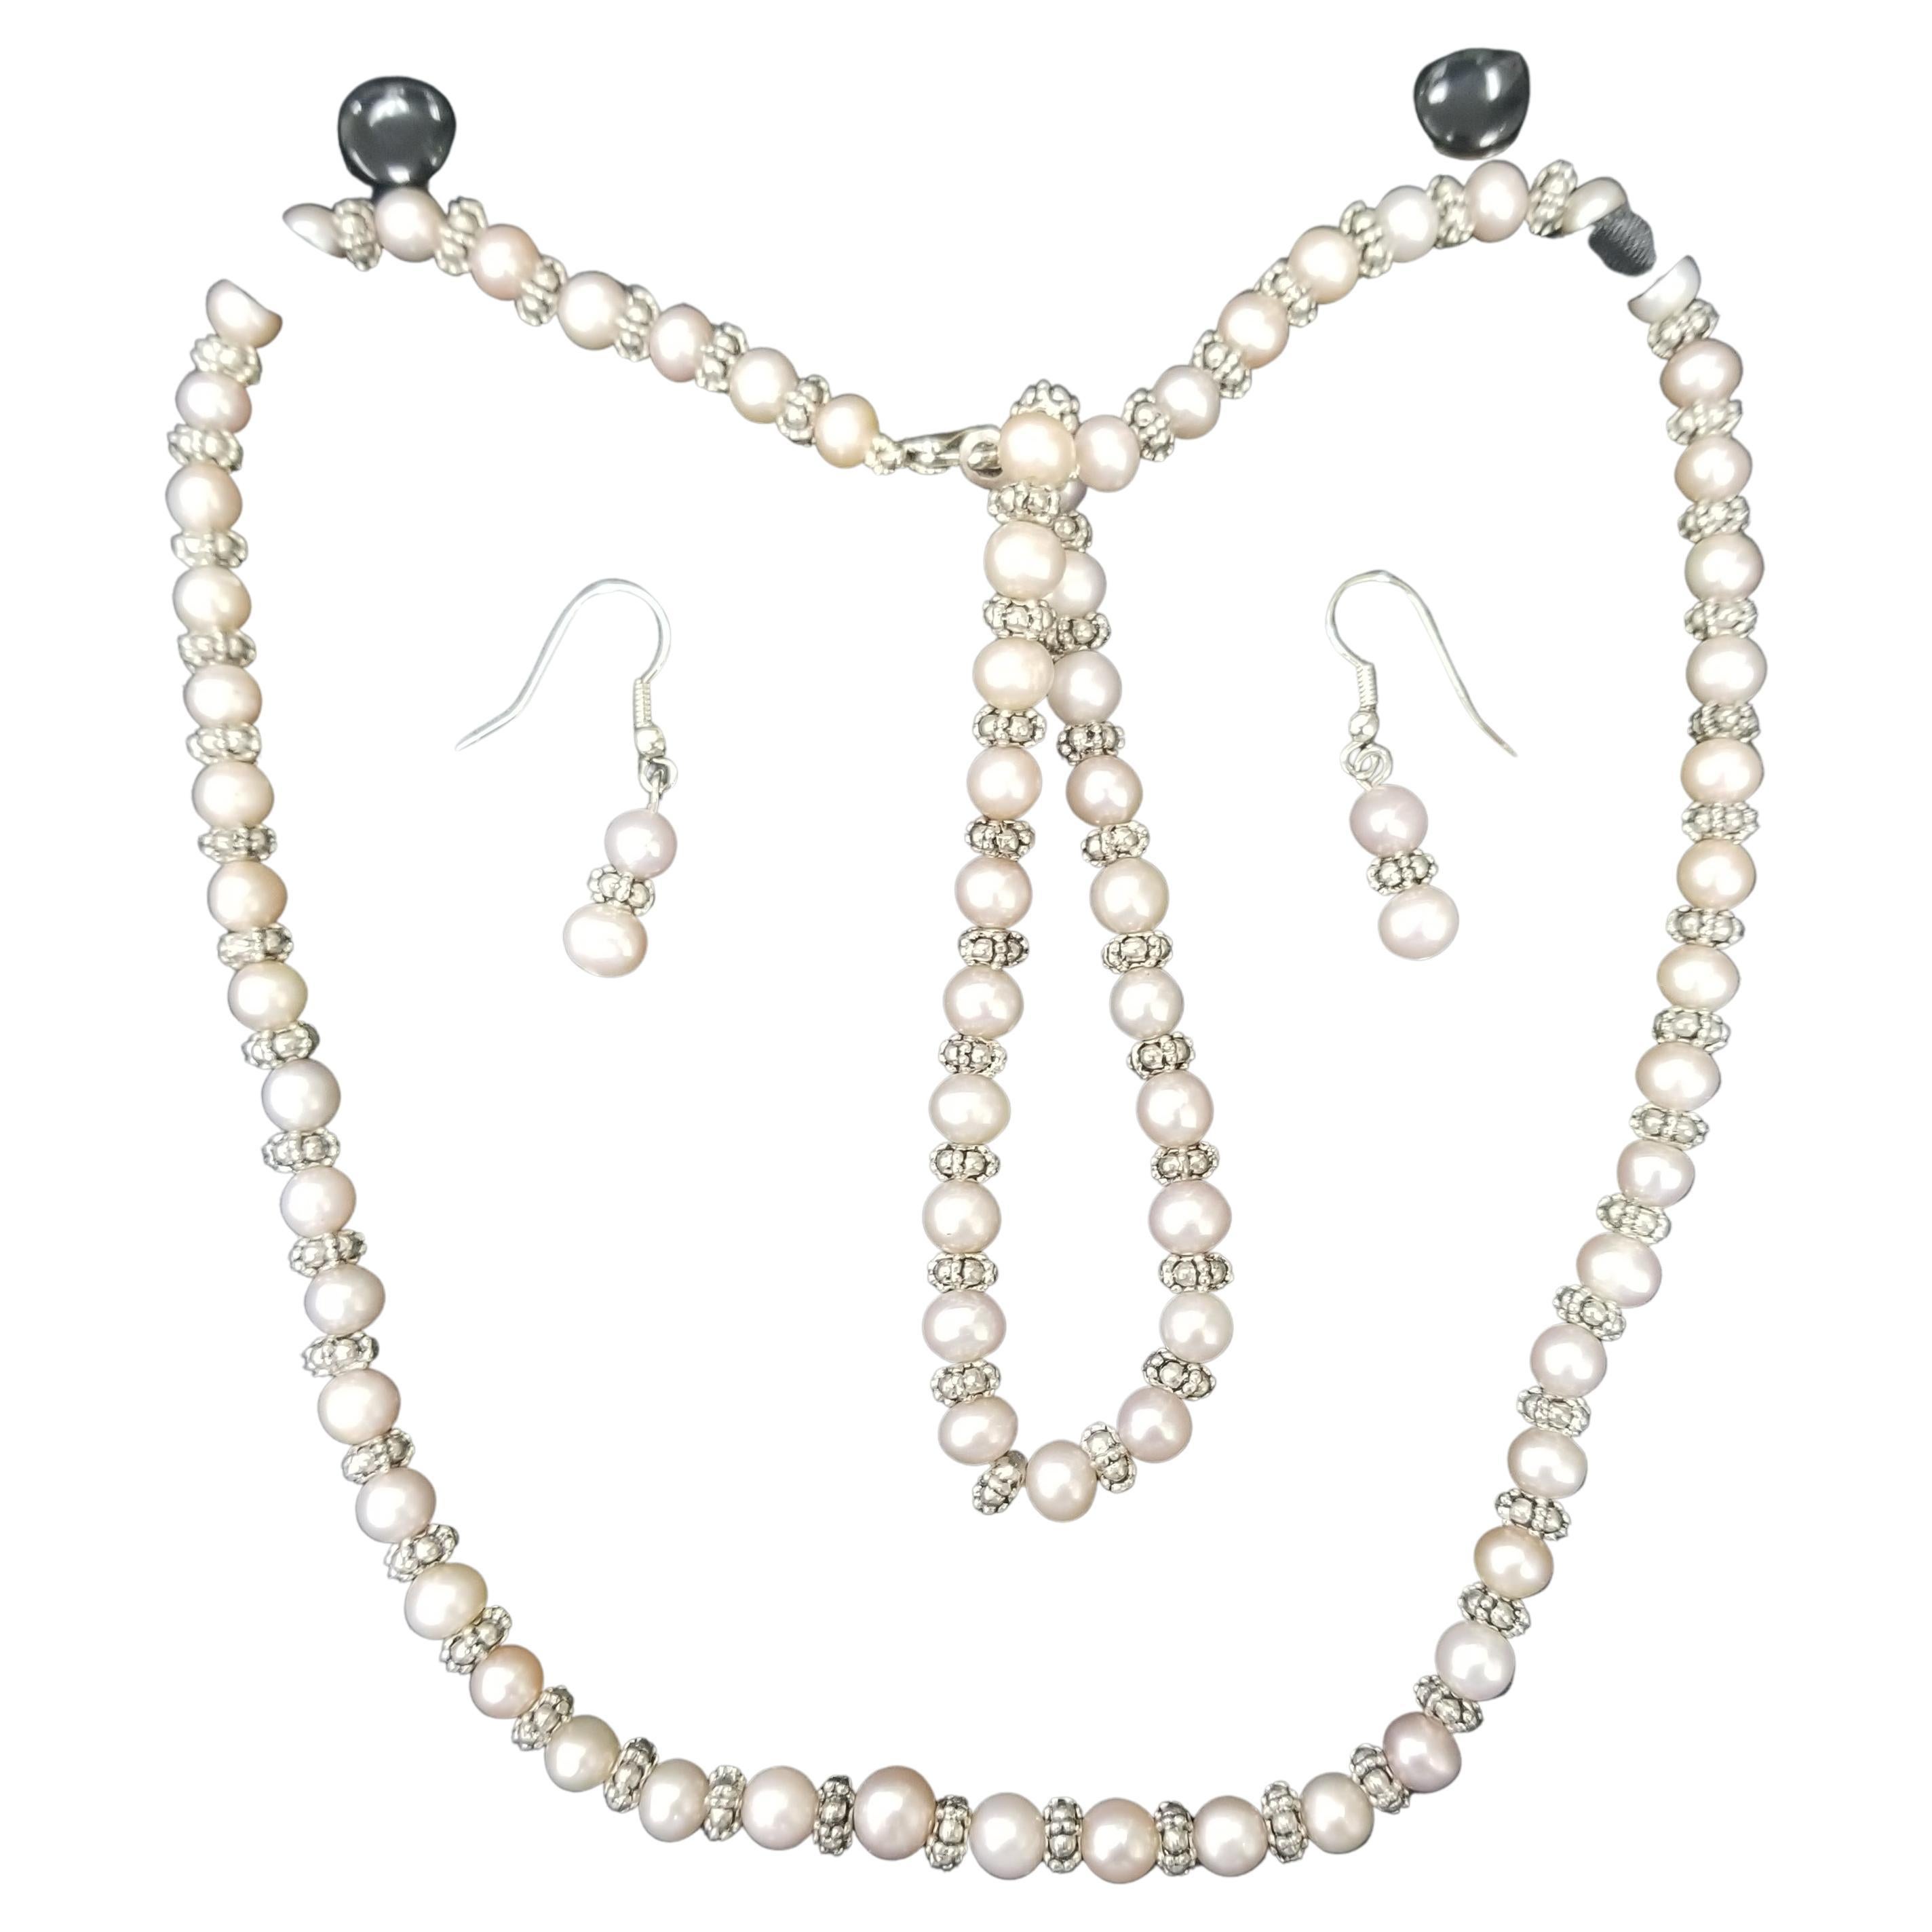 Set of Fresh Water Pink Cultured Pearls Necklace Bracelet and Earrings w Rondel For Sale